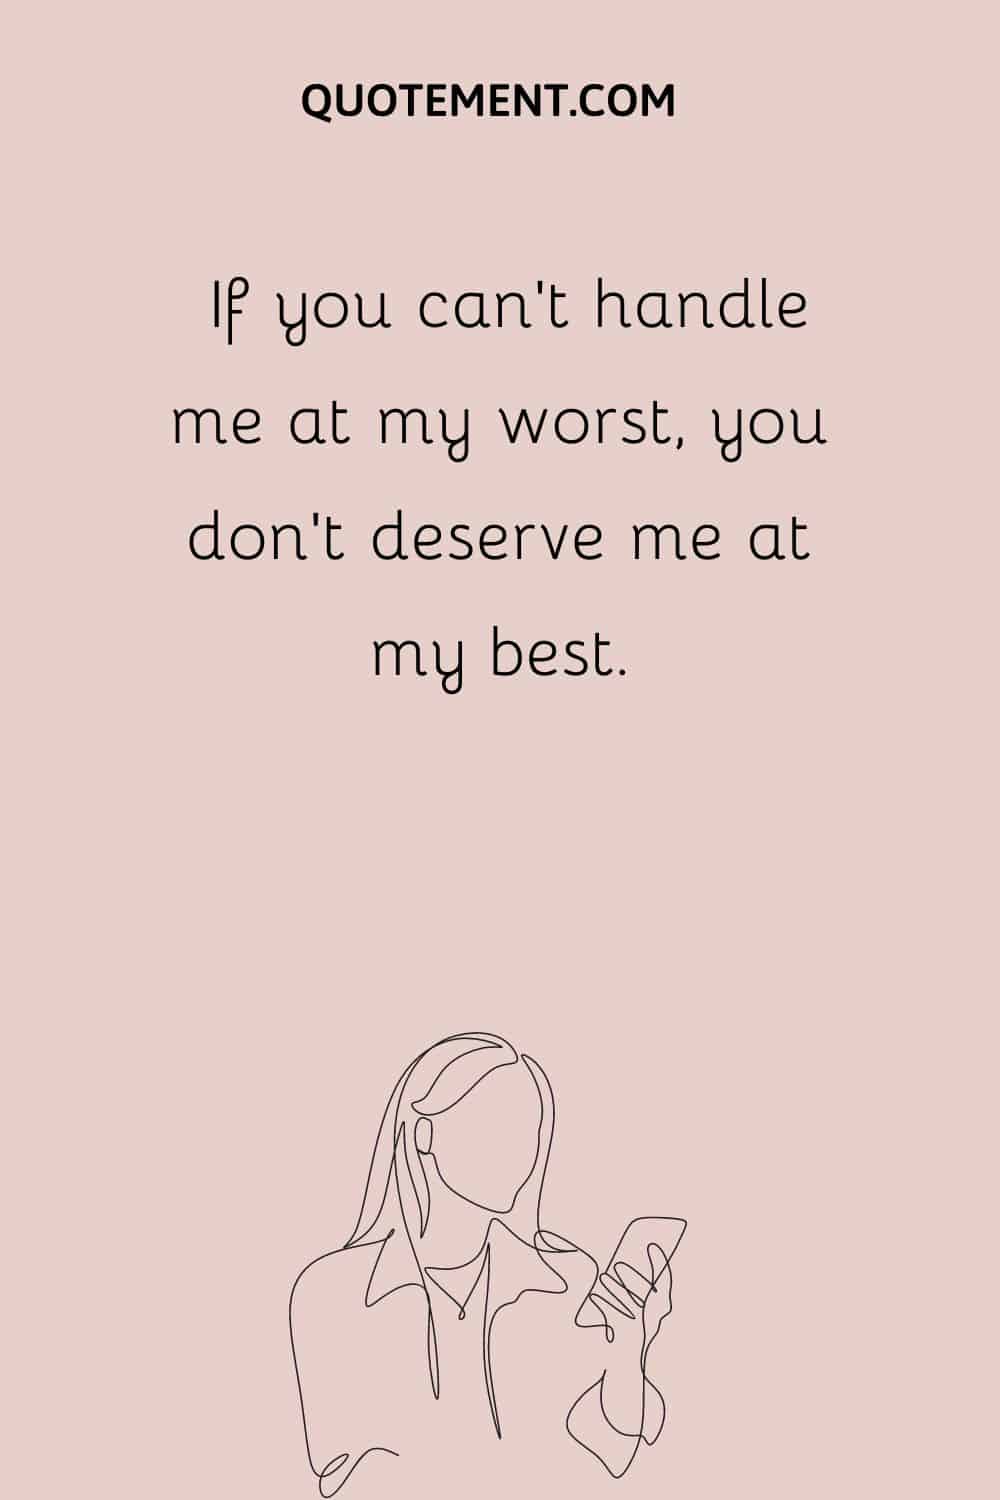 If you can’t handle me at my worst, you don’t deserve me at my best.